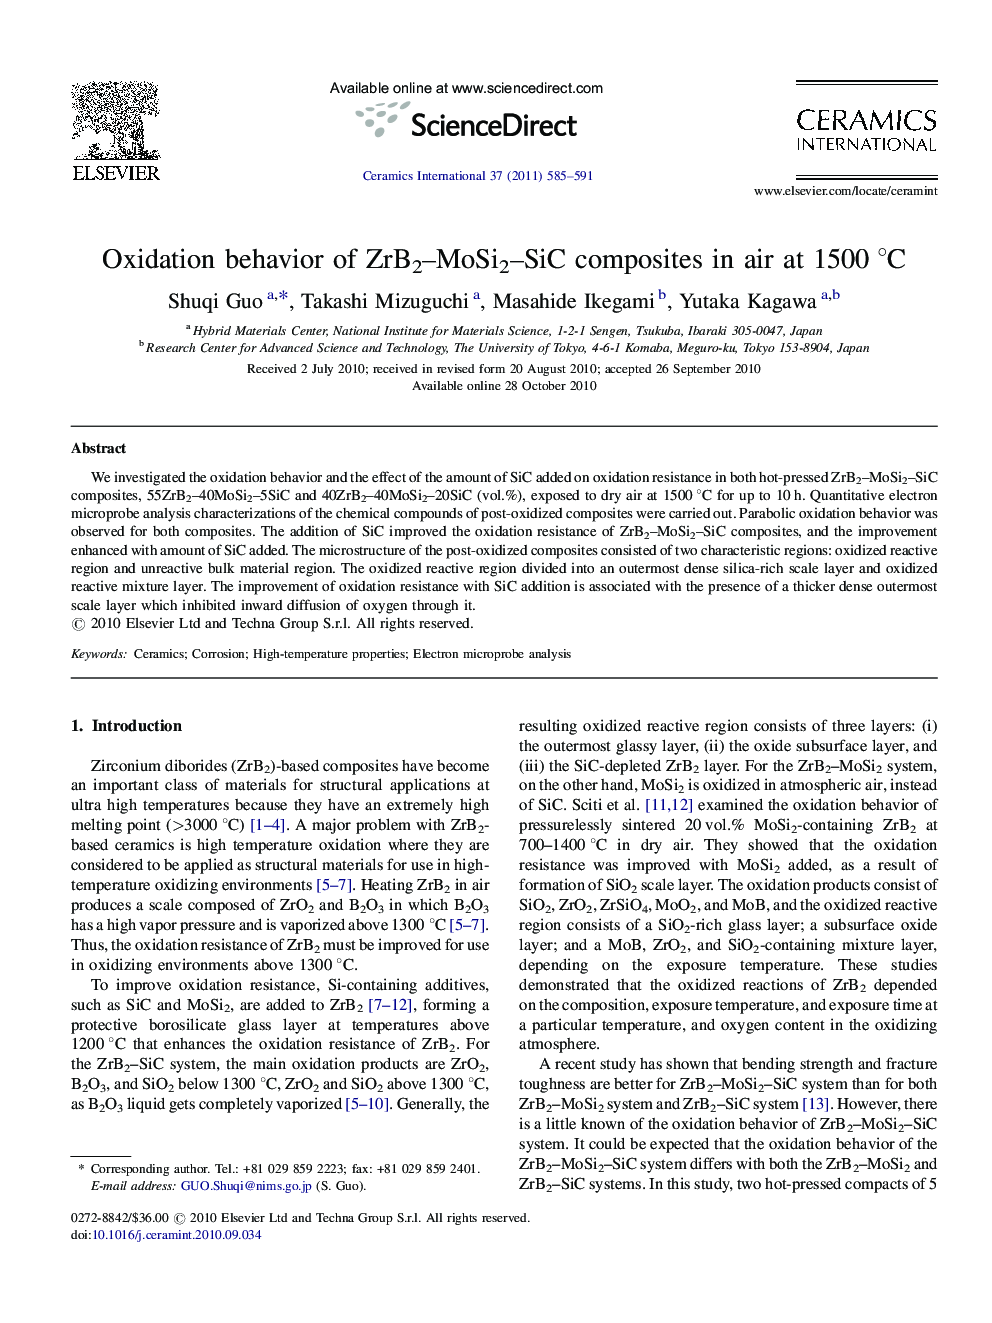 Oxidation behavior of ZrB2–MoSi2–SiC composites in air at 1500 °C